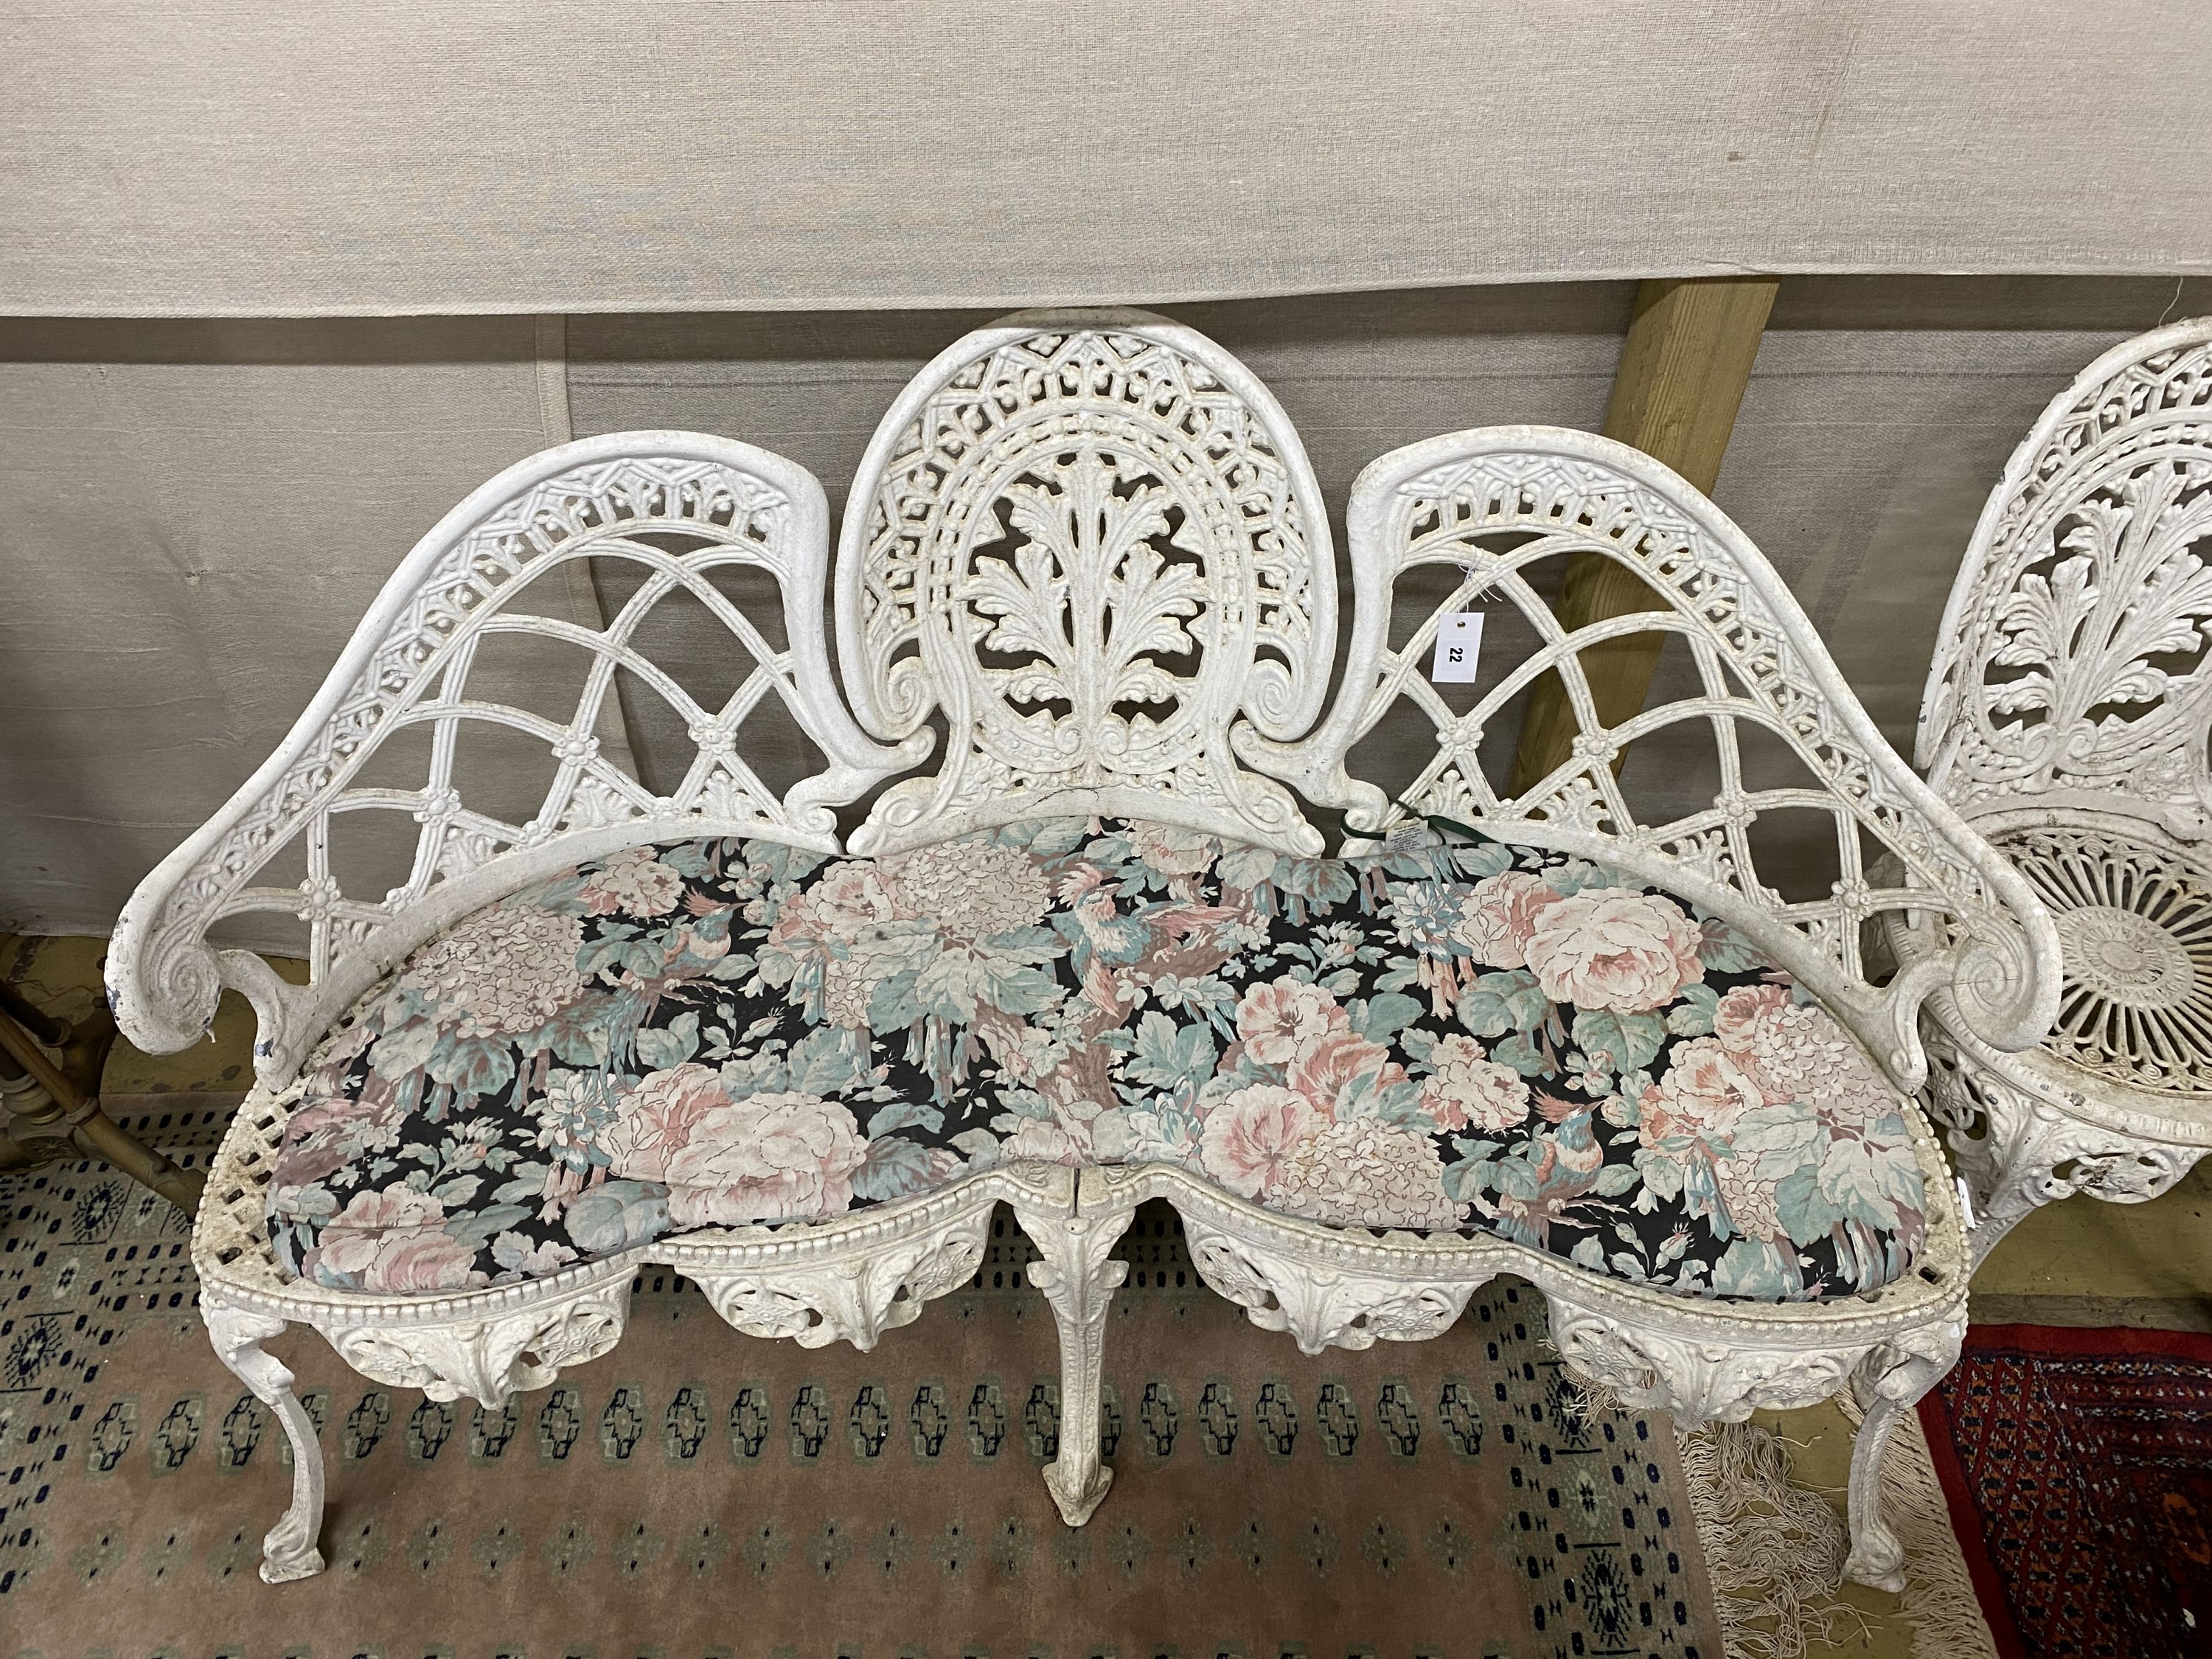 A five piece white painted metal alloy garden suite comprising two benches, length 137cm, pair of chairs and a table, length 141cm